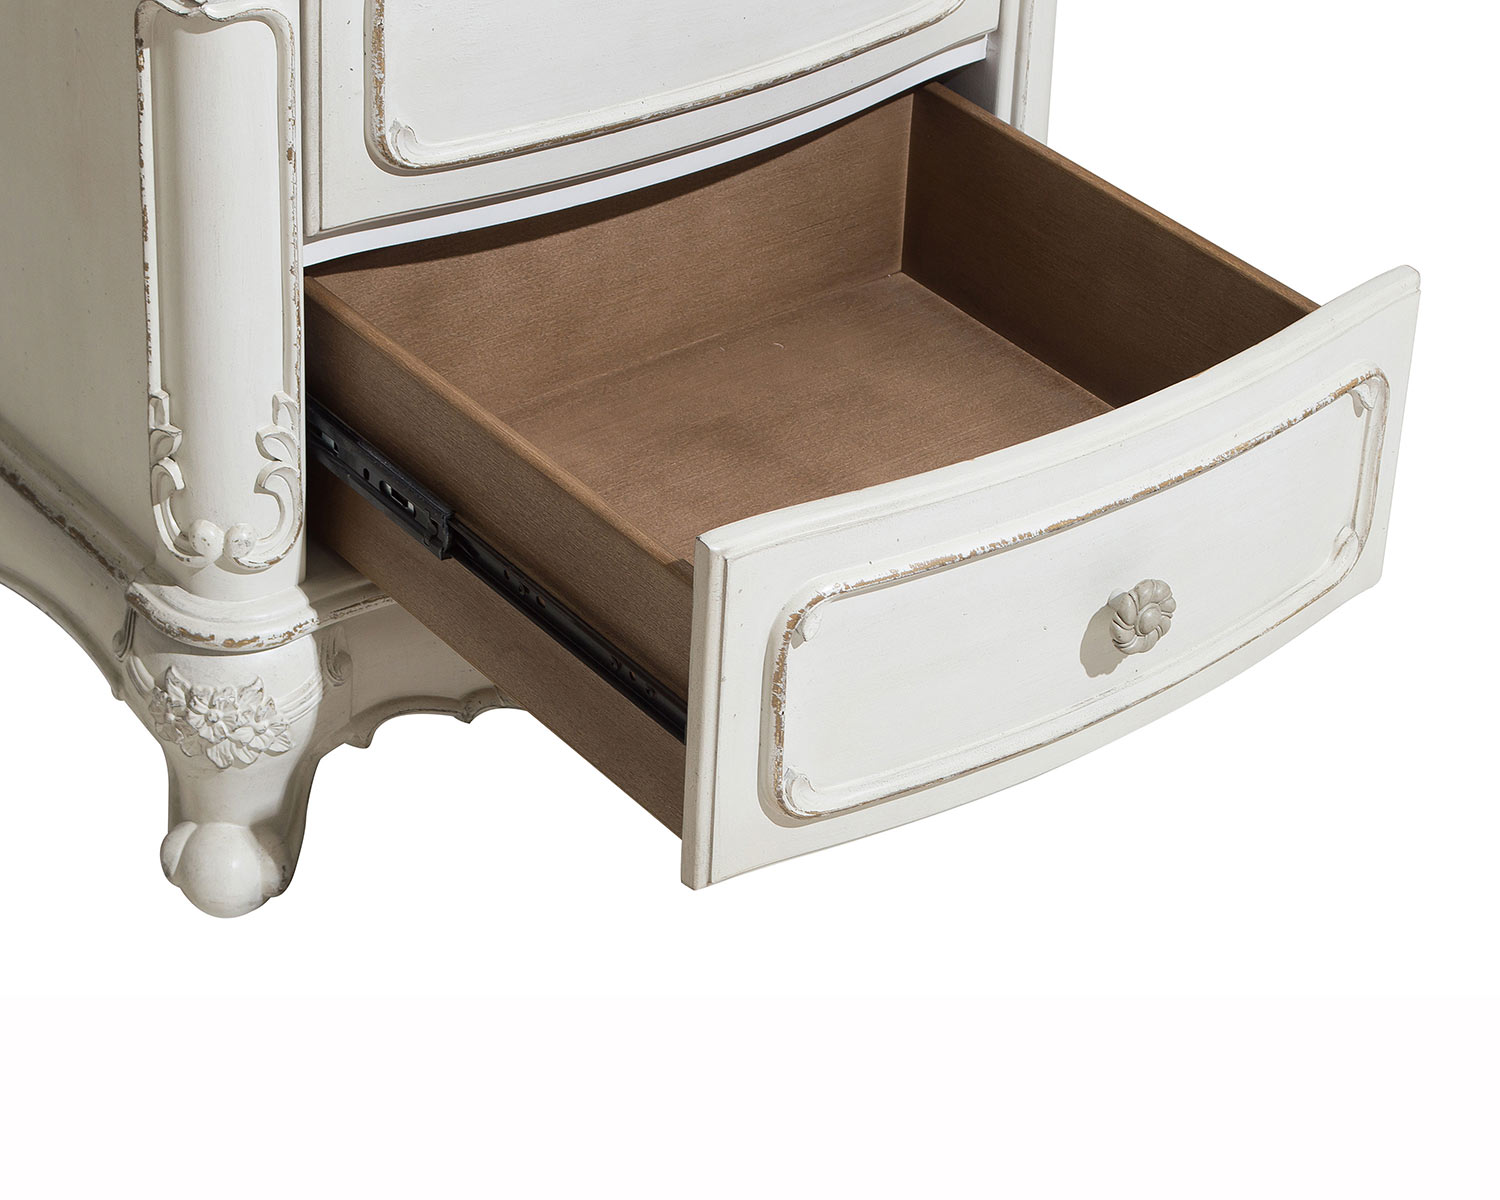 Homelegance Cinderella Night Stand - Antique White with Gray Rub-Through